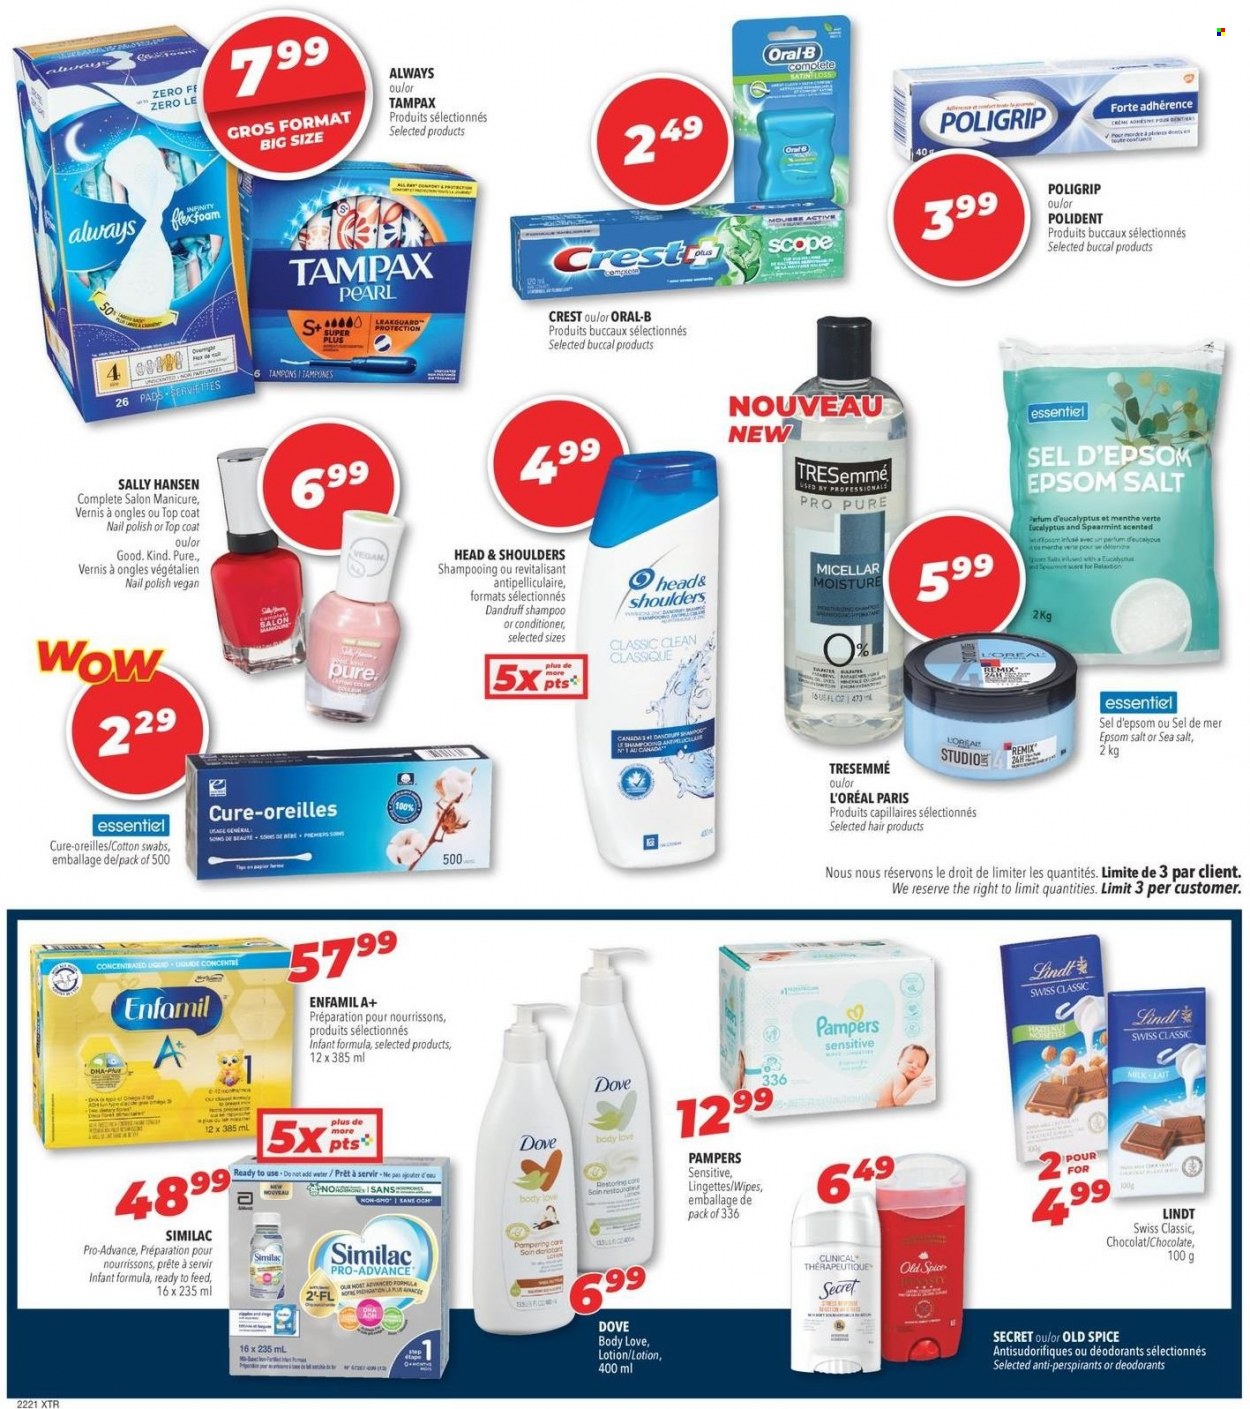 thumbnail - Circulaire Familiprix Extra - 19 Mai 2022 - 25 Mai 2022 - Produits soldés - menthe, lingettes, Dove, shampooing, Always, L'Oréal, Head & Shoulders, Tampax, Old Spice, Oral-b, Pampers, Sally Hansen, Lindt. Page 6.